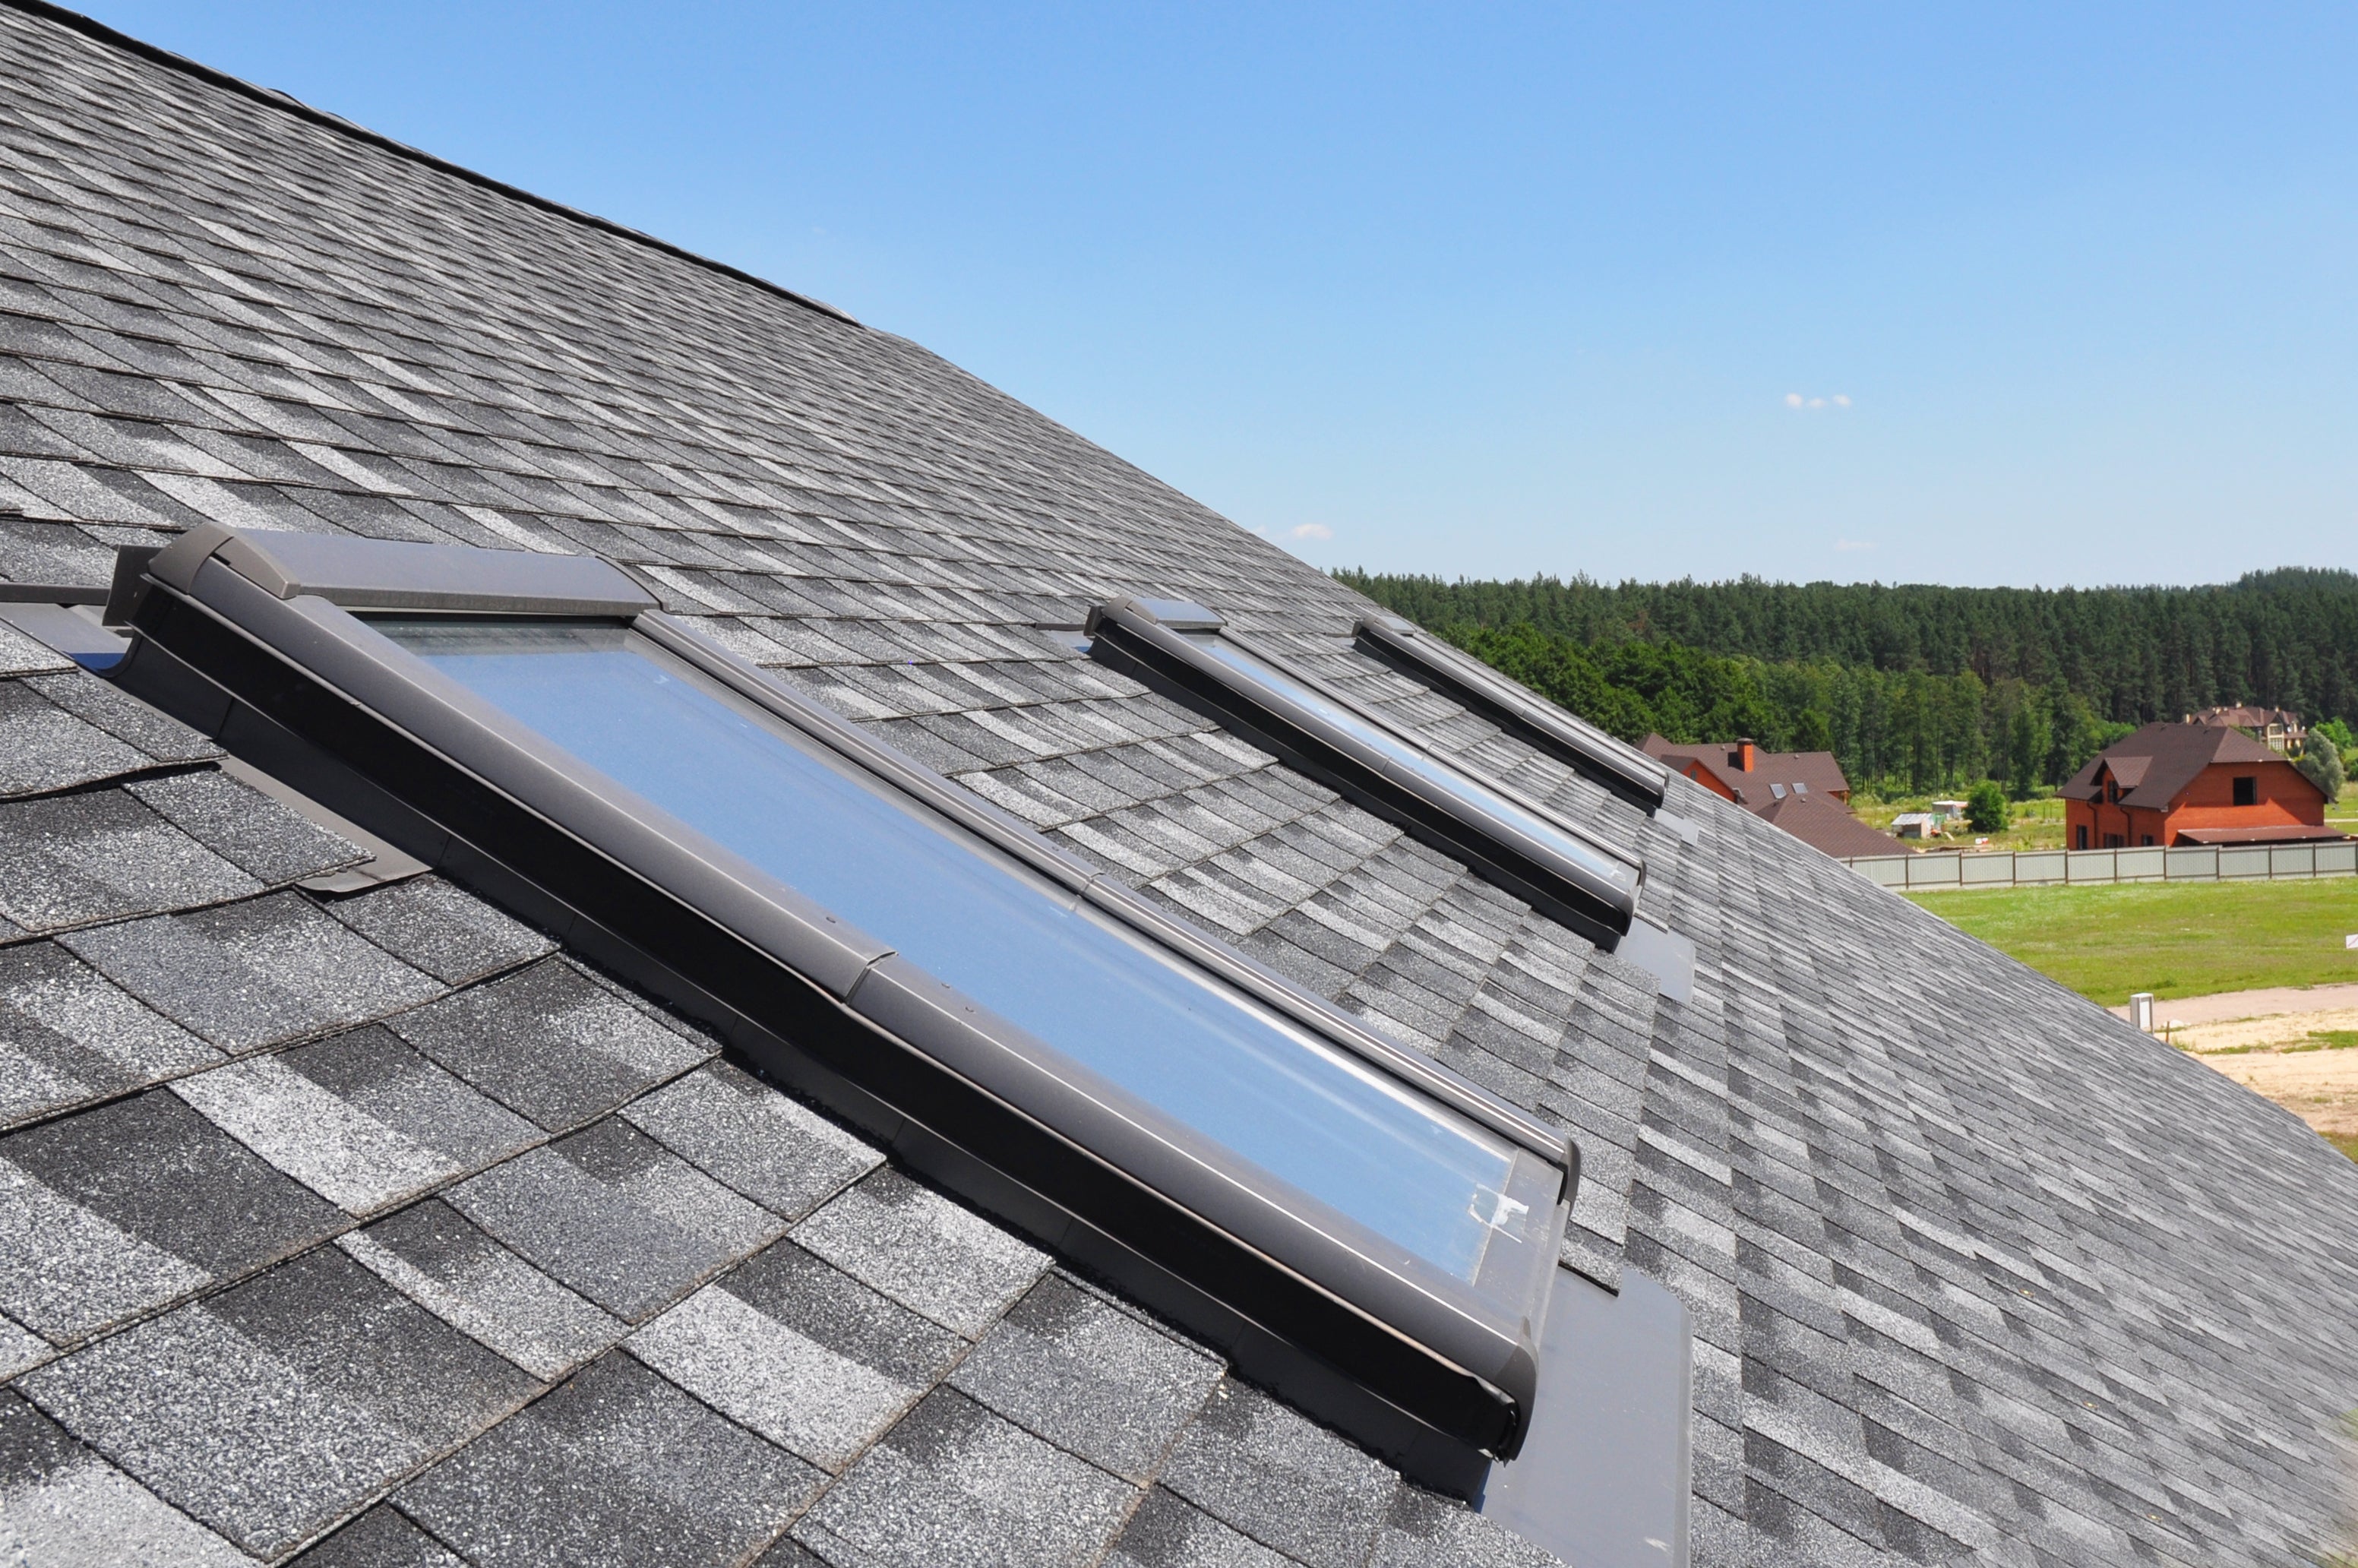 Curb Mounted Skylights from Turkstra and Velux